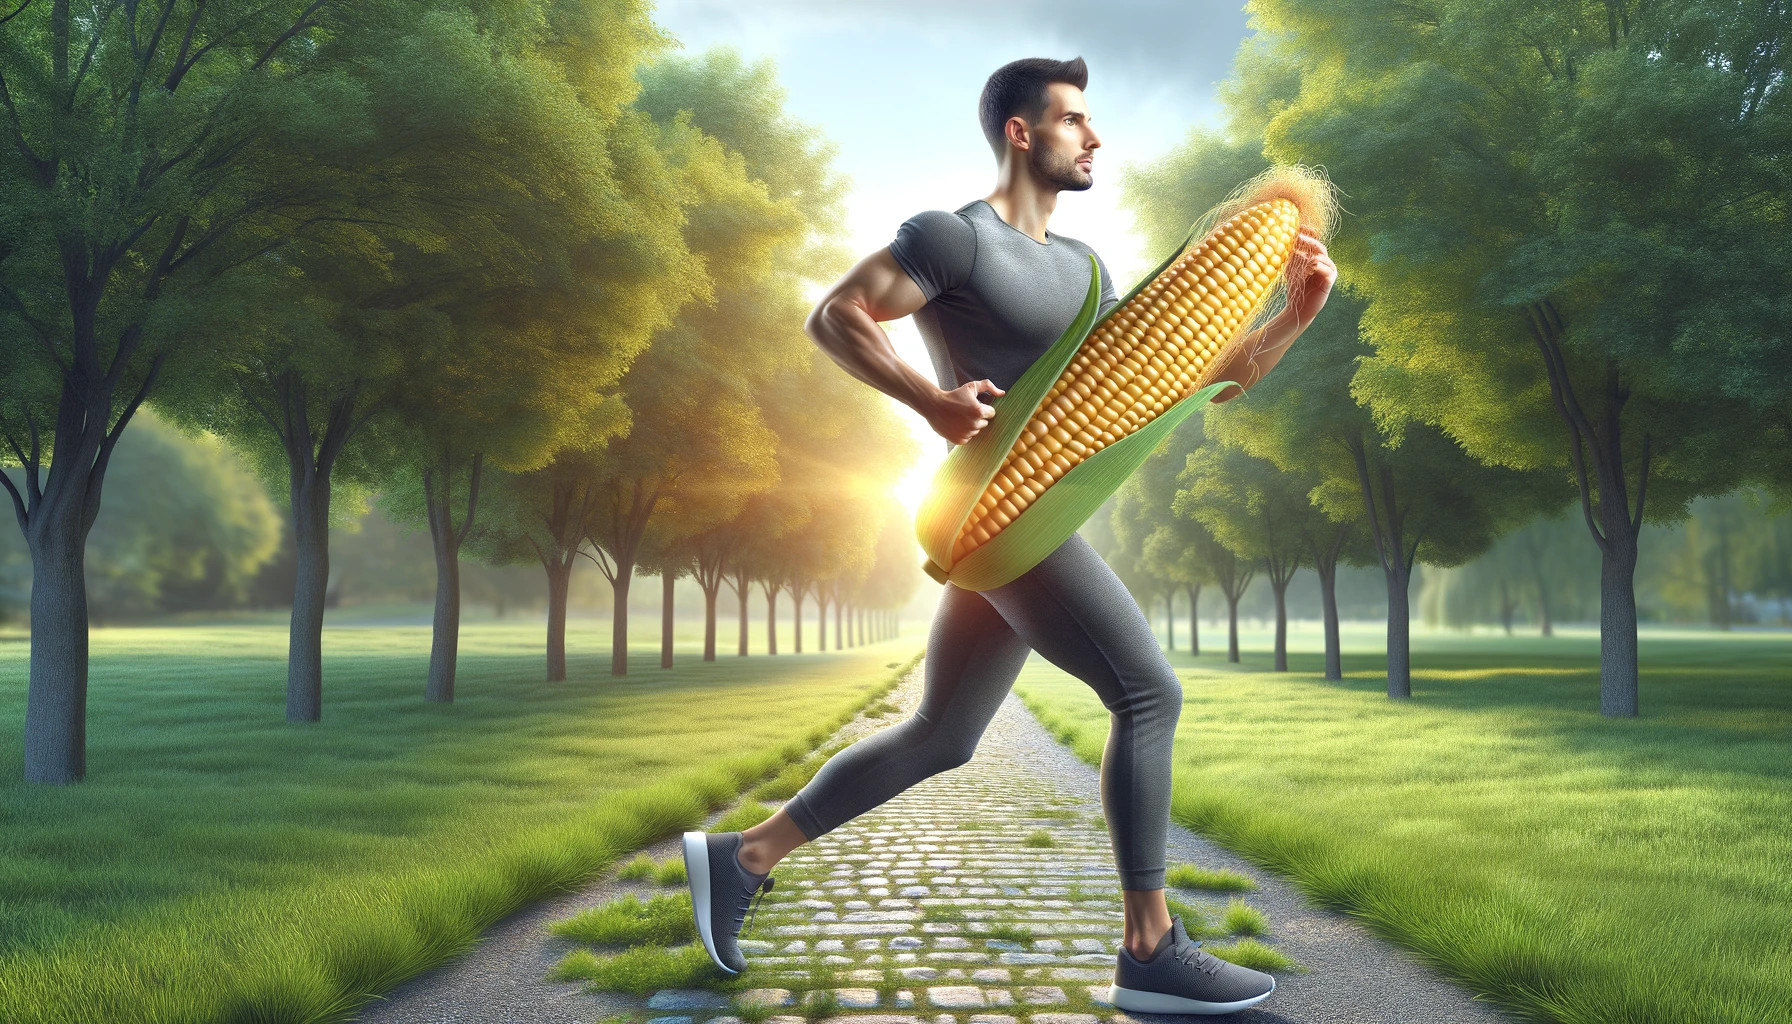 A realistic scene of someone jogging in a park, holding an ear of corn, integrating healthy eating with an active lifestyle.